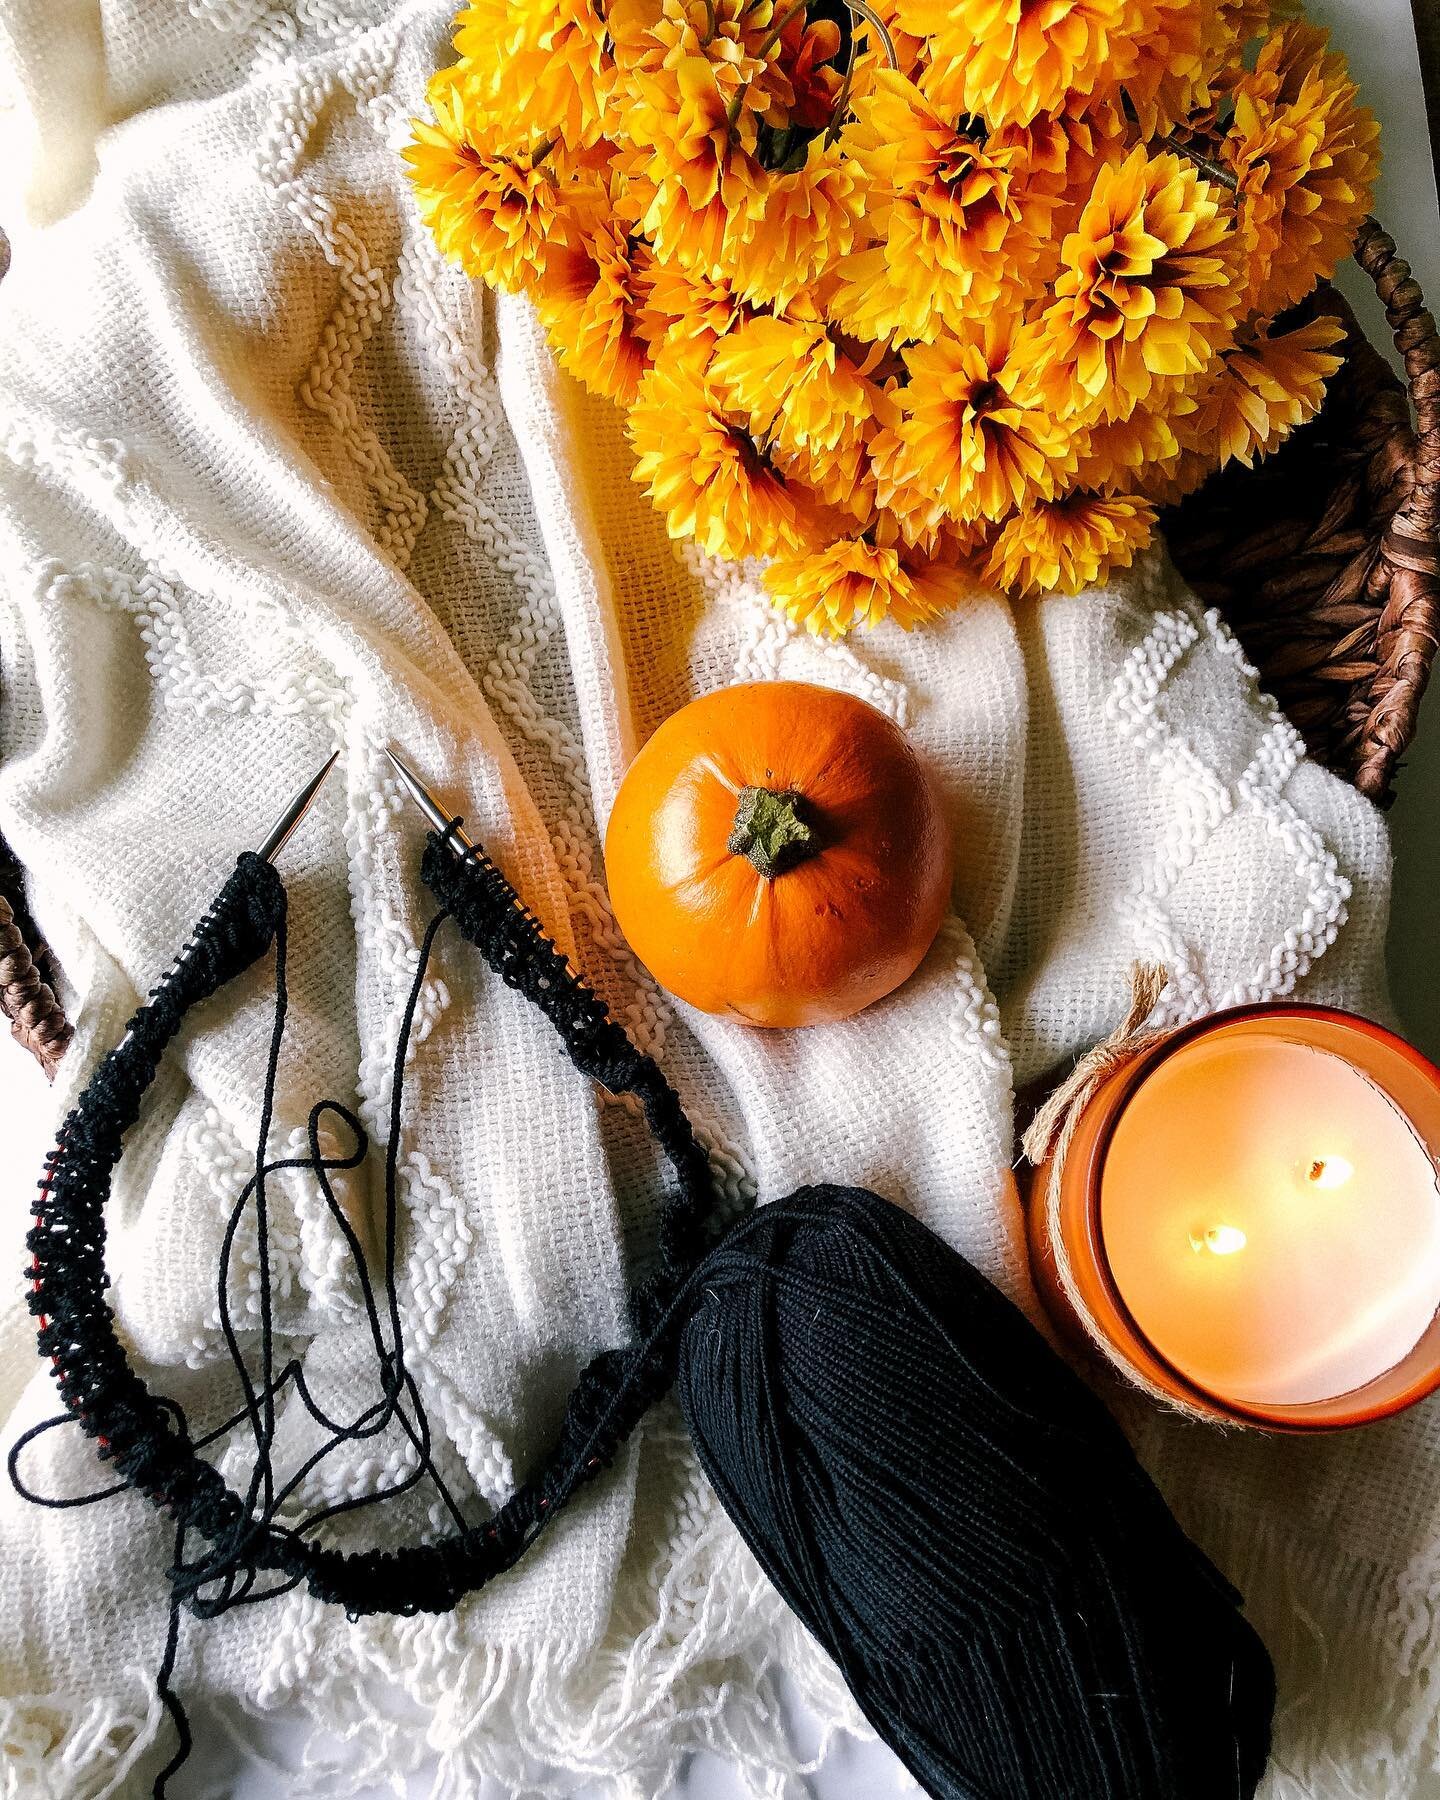 Thank you for the new shop update love!! 🧡 It feels awesome to finally have all the new fall/winter knitwear listed + available to you 😍⁣
⁣
My cozy fall weekend plans &gt;&gt; starting a new Juliette cardigan in Black! 🖤 look how tiny and delicate